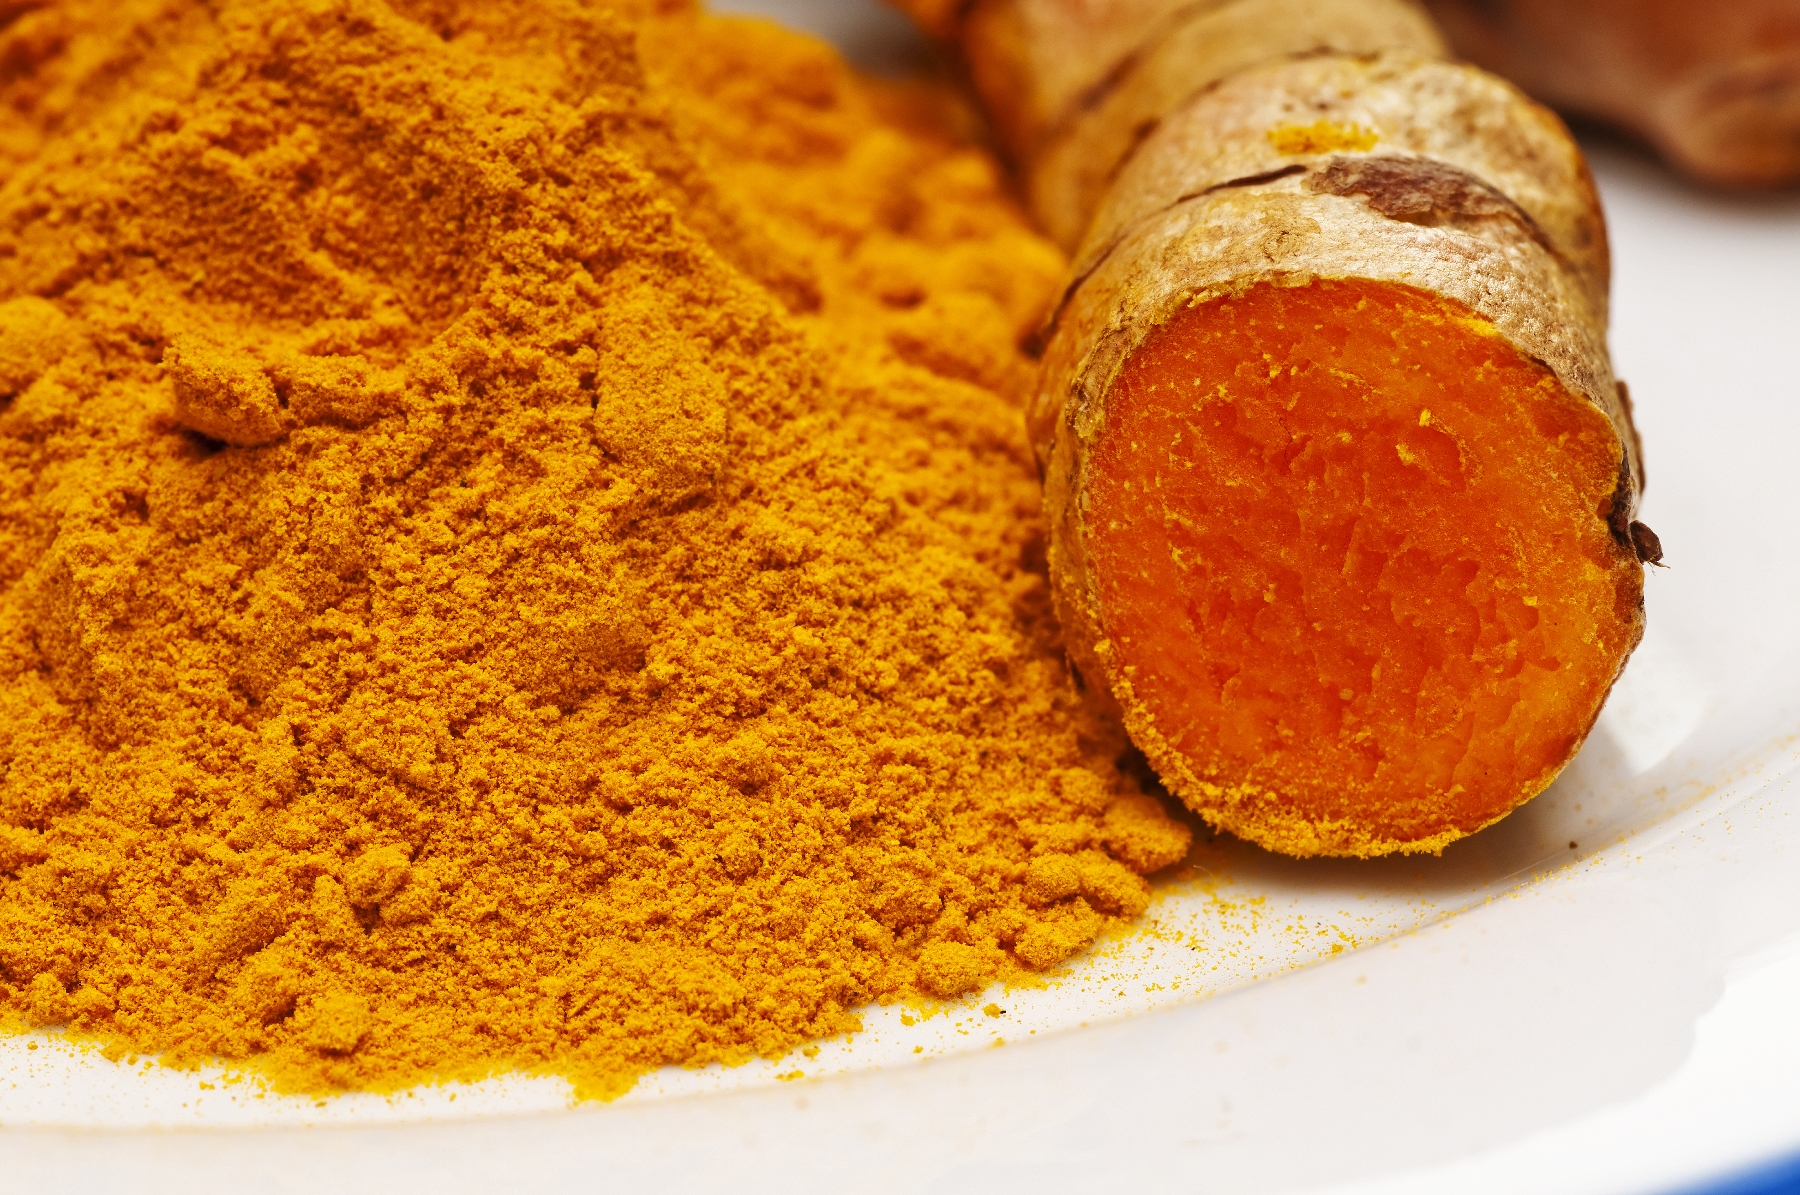 That Spice In Indian Food Might Help Treat Cancer